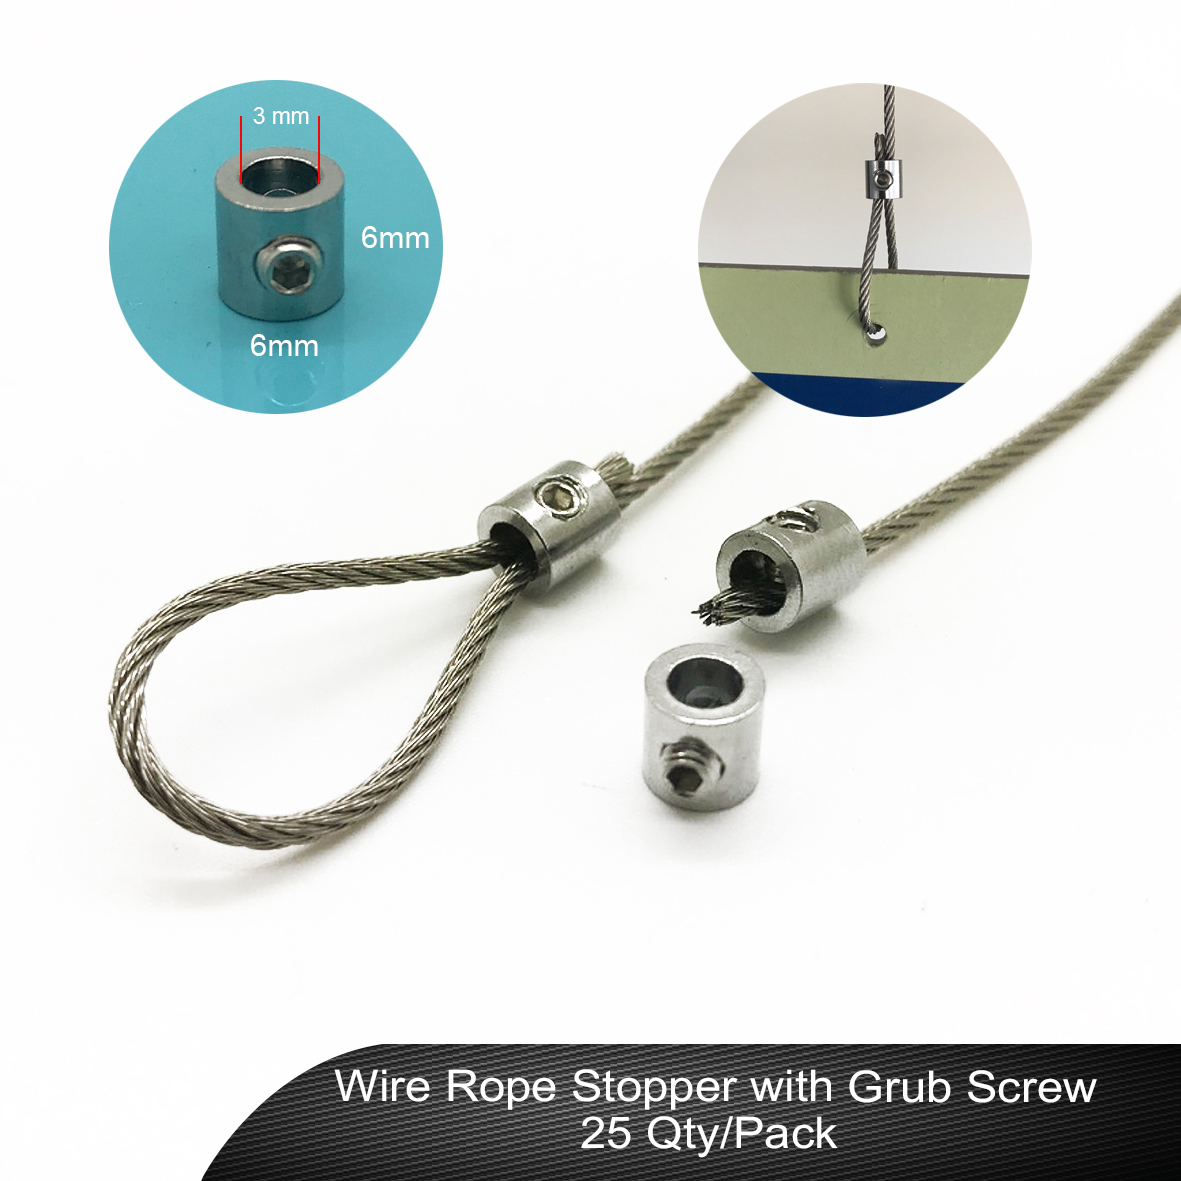 Wire Rope Stopper with Grub Screw 25 Qty/Pack